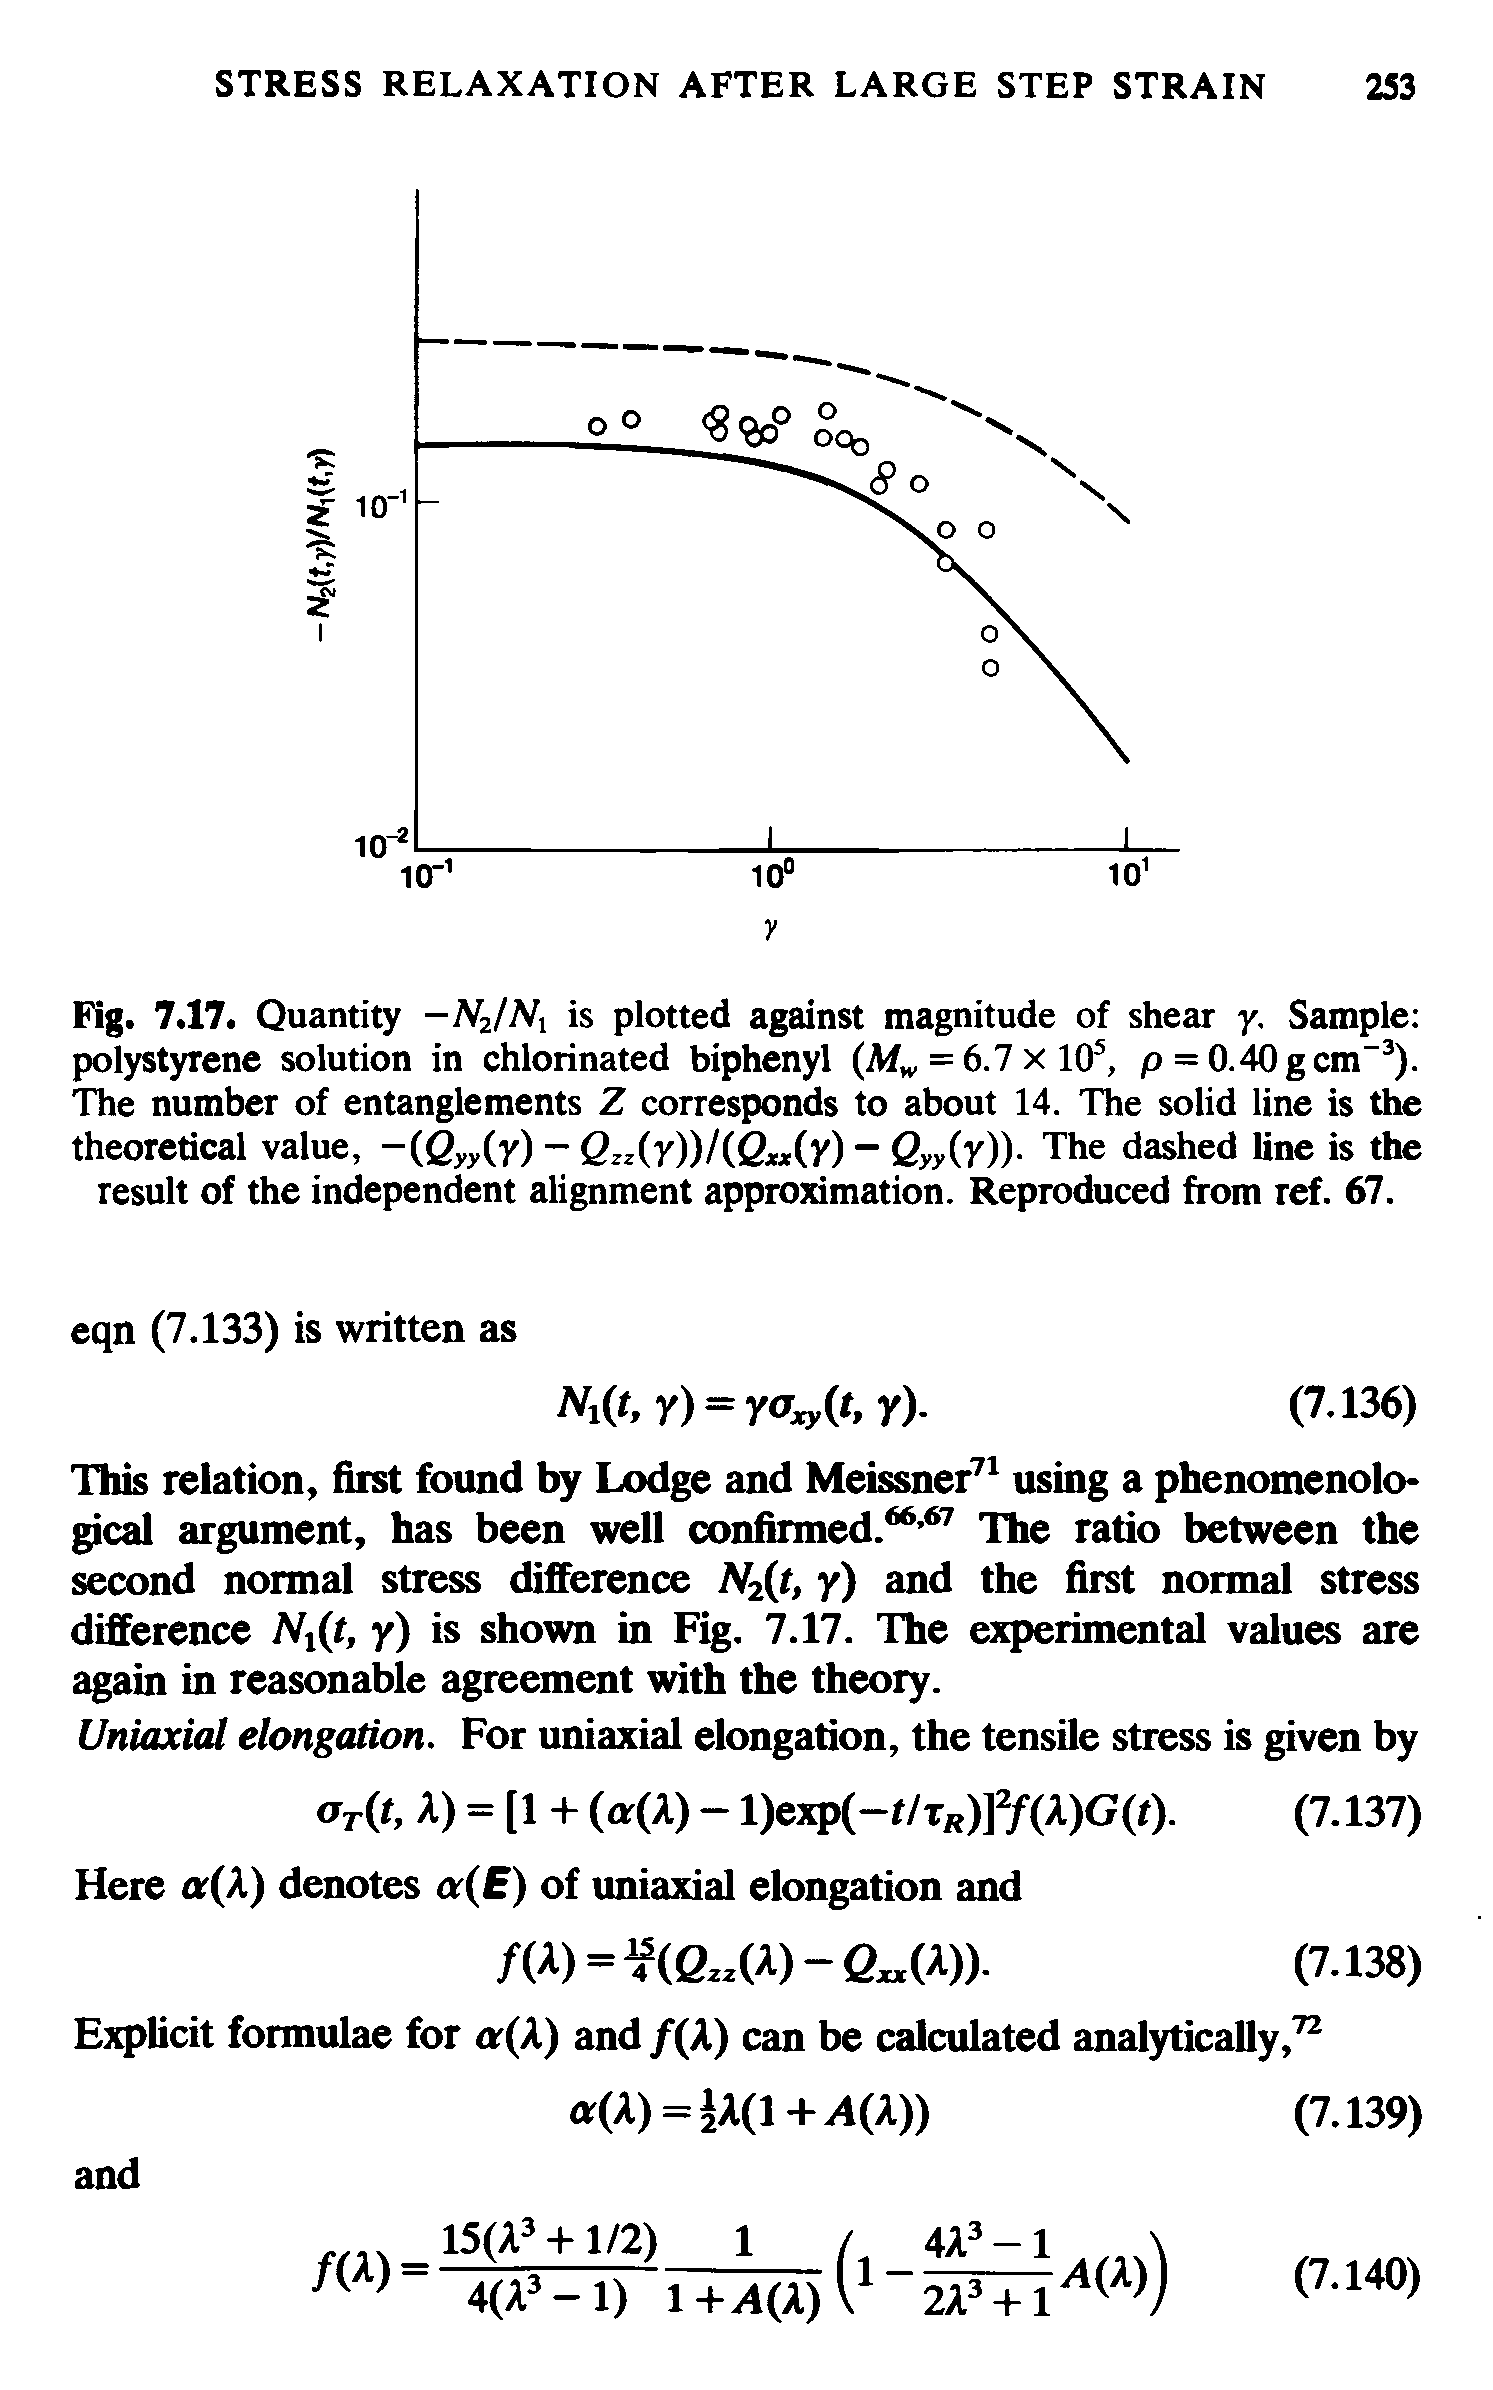 Fig. 7.17. Quantity -N2/N1 is plotted against magnitude of shear y. Sample polystyrene solution in chlorinated biphenyl (Af = 6.7 x 10, p = 0.40gcm" ). The number of entanglements Z corresponds to about 14. The solid line is the theoretical value, - Qyyiy) - Gzz(y))/(C (y) Qyyiv))- The dashed line is the result of the independent alignment approximation. Reproduced from ref. 67.